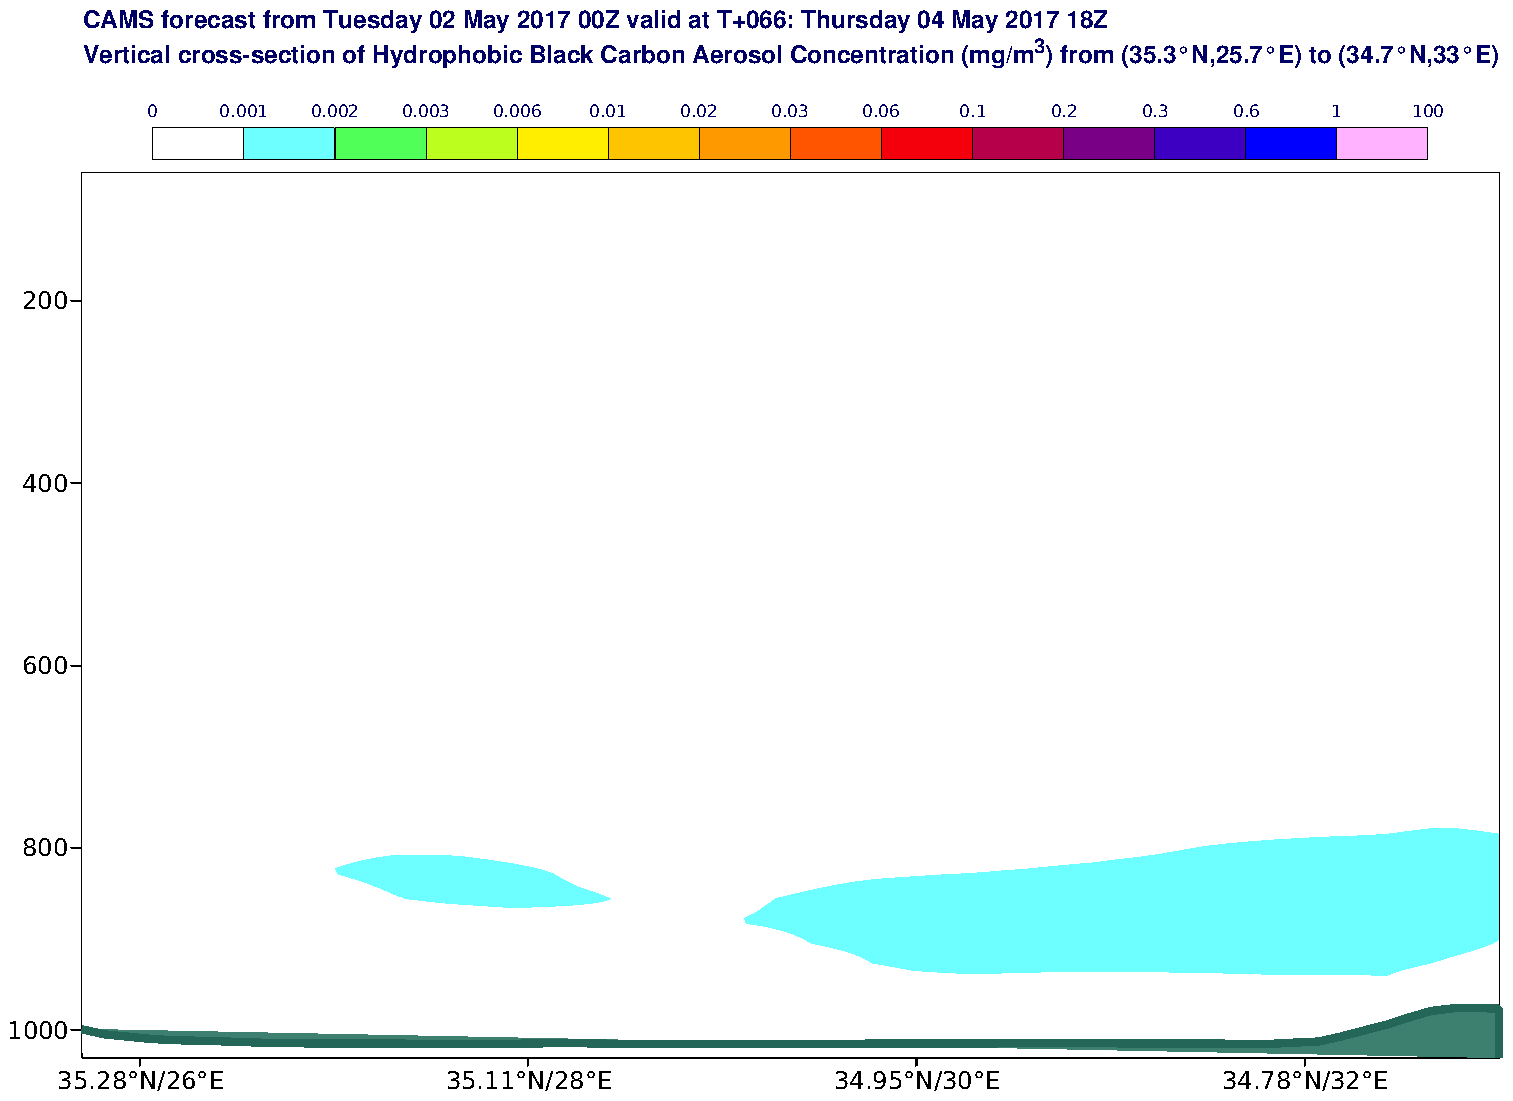 Vertical cross-section of Hydrophobic Black Carbon Aerosol Concentration (mg/m3) valid at T66 - 2017-05-04 18:00